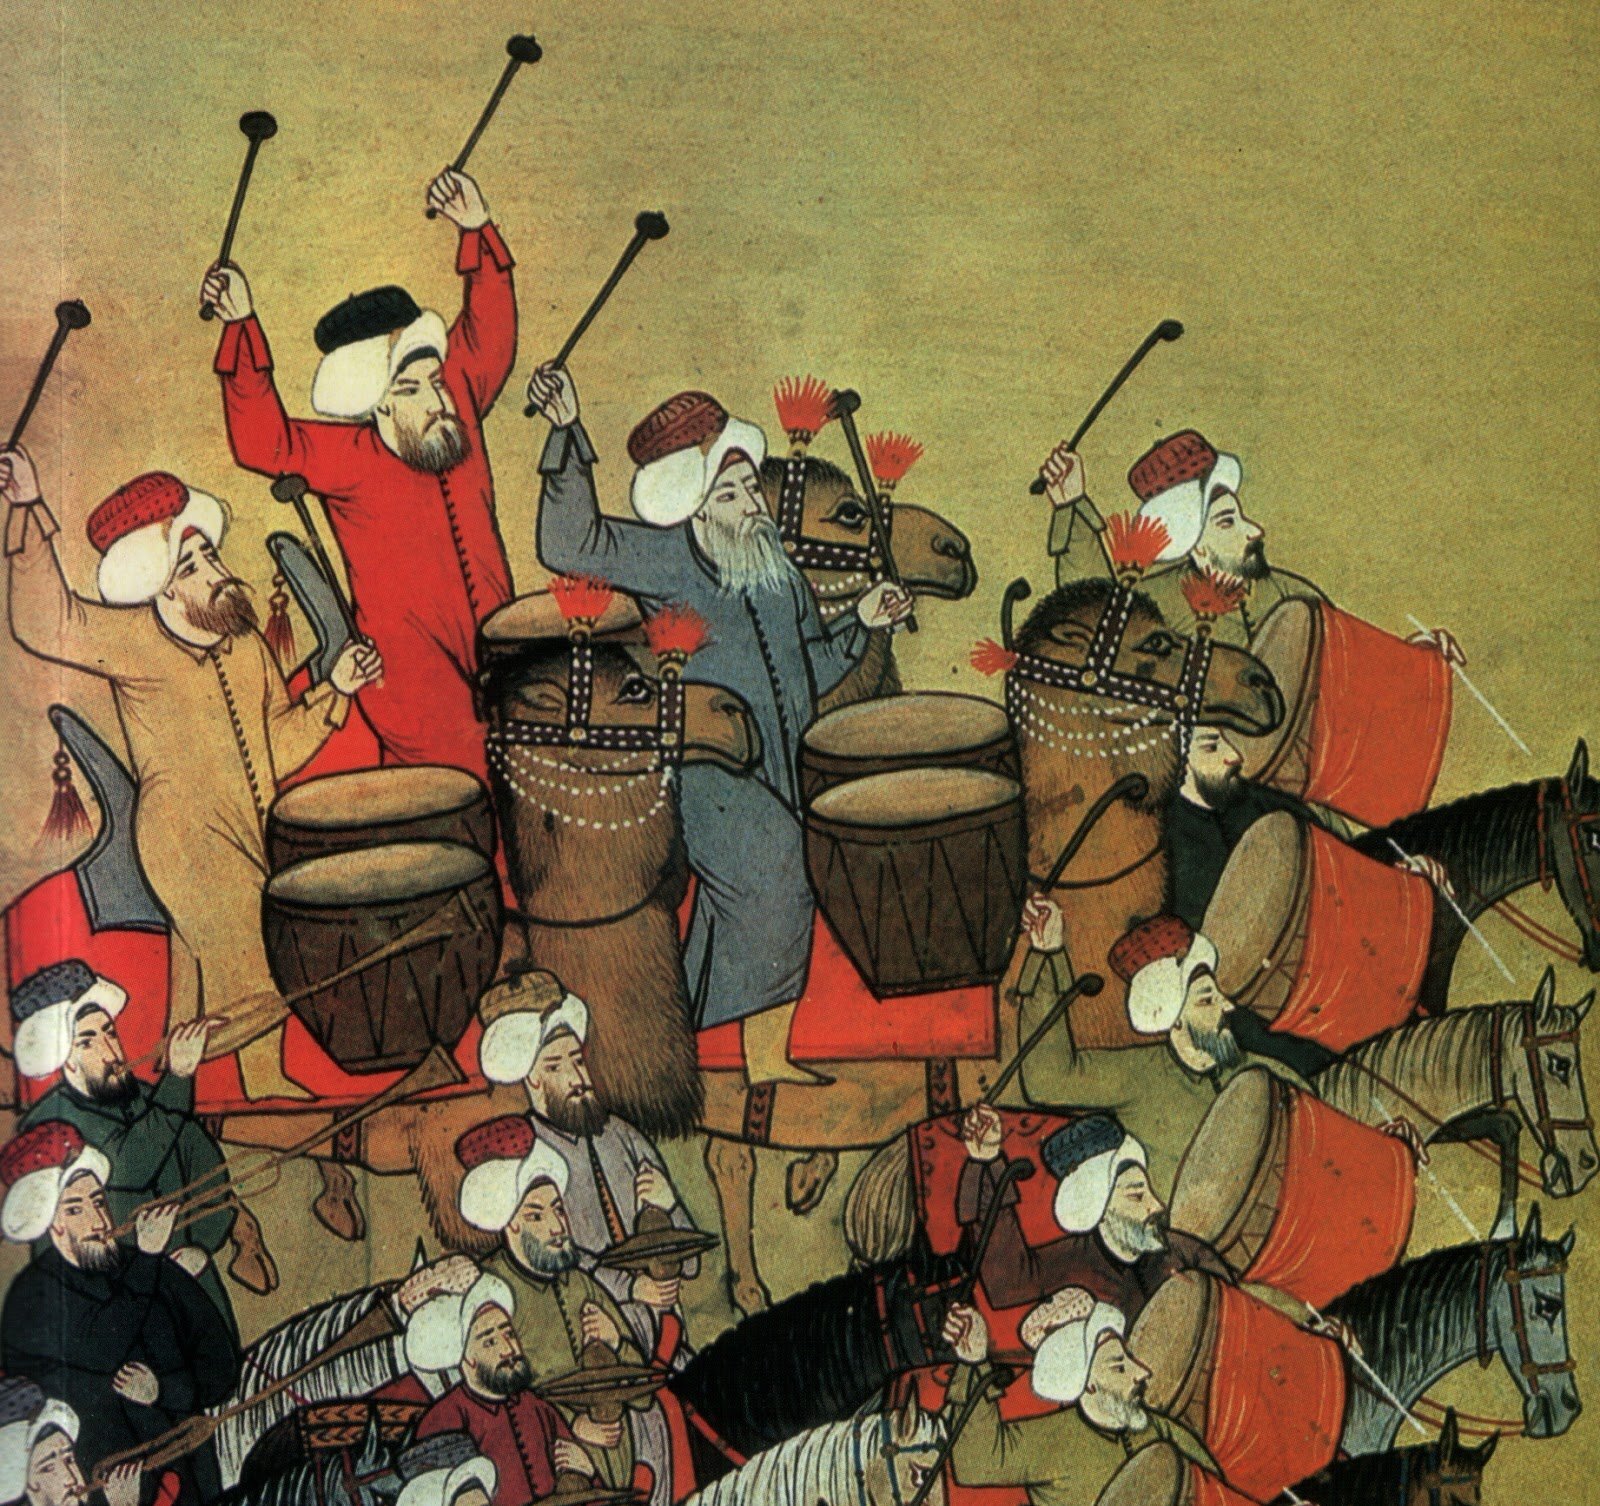 Image of figures playing drums